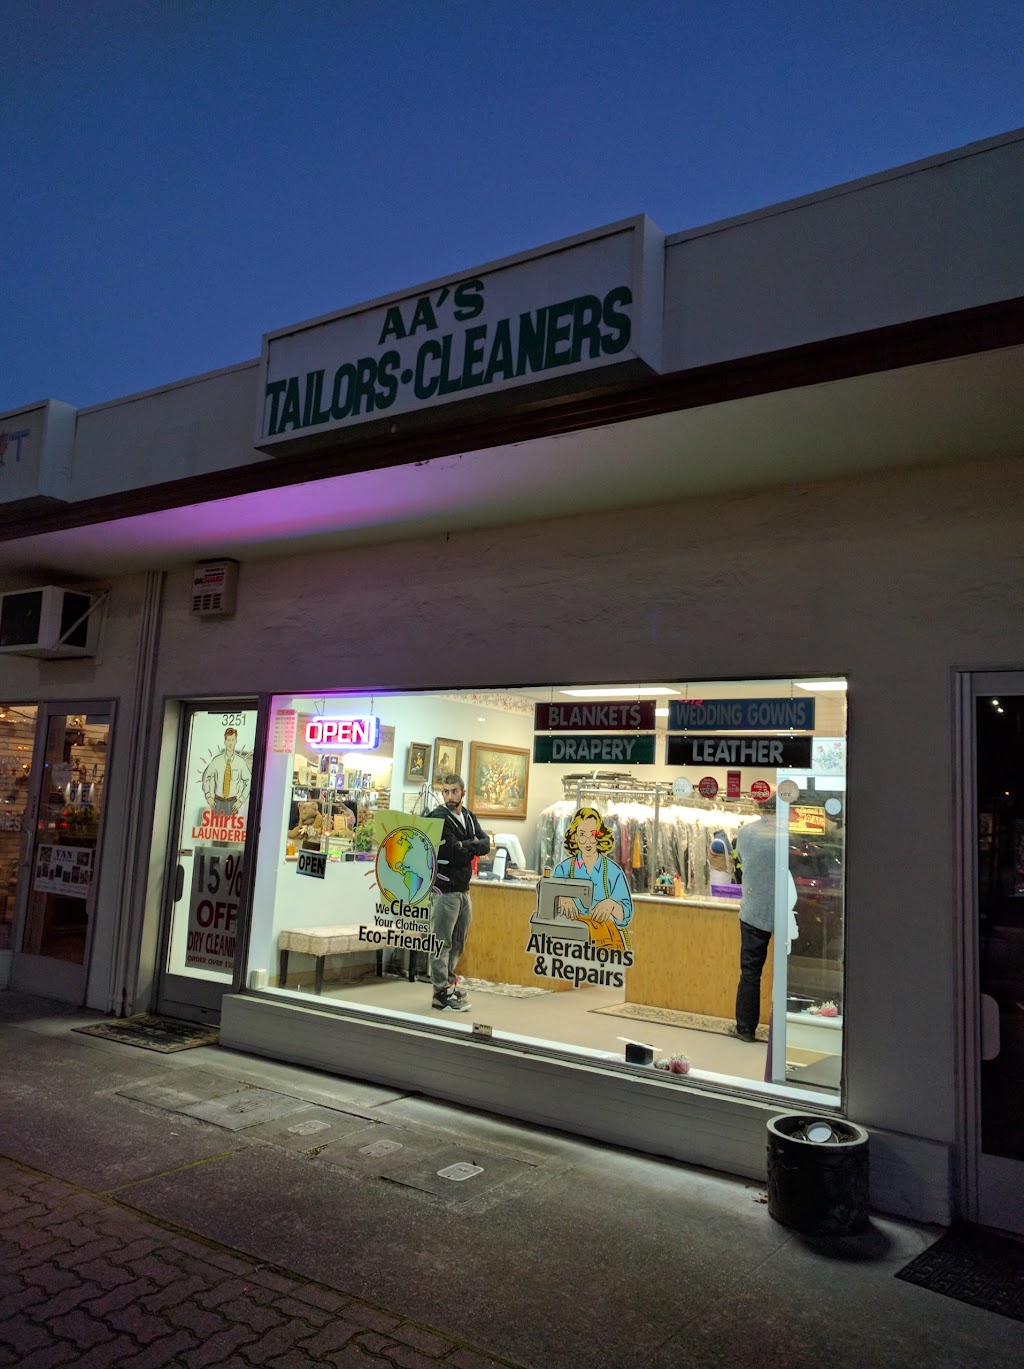 AAs Tailors & Cleaners | 3251 Castro Valley Blvd, Castro Valley, CA 94546 | Phone: (510) 582-1220